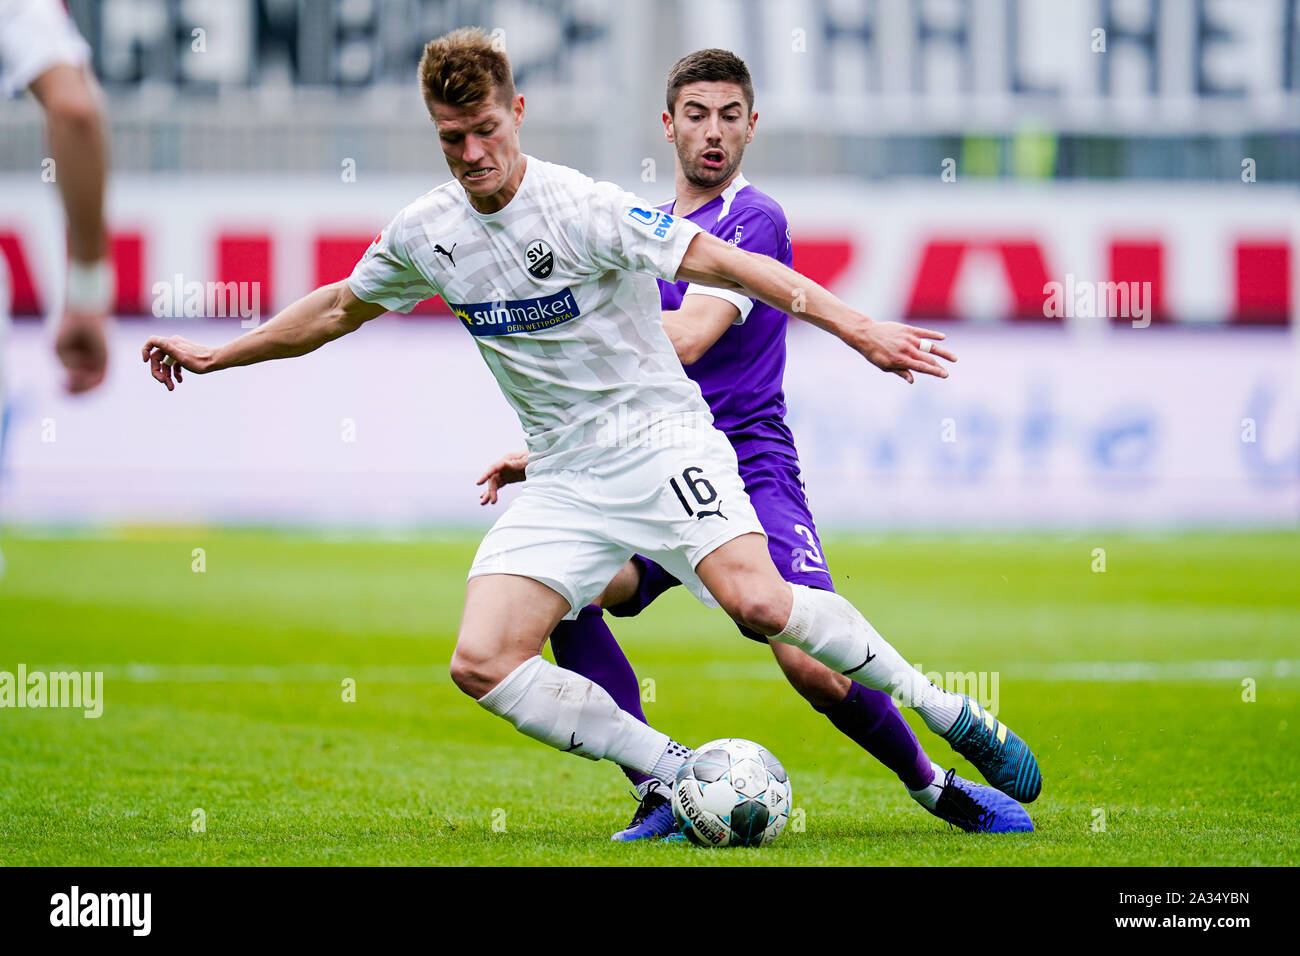 Sandhausen, Germany. 05th Oct, 2019. Soccer: 2nd Bundesliga, SV Sandhausen - Erzgebirge Aue, 9th matchday, in Hardtwaldstadion. Sandhausens Kevin Behrens (l) and Marko Mihojevic from Erzgebirge Aue fight for the ball. Credit: Uwe Anspach/dpa - IMPORTANT NOTE: In accordance with the requirements of the DFL Deutsche Fußball Liga or the DFB Deutscher Fußball-Bund, it is prohibited to use or have used photographs taken in the stadium and/or the match in the form of sequence images and/or video-like photo sequences./dpa/Alamy Live News Stock Photo